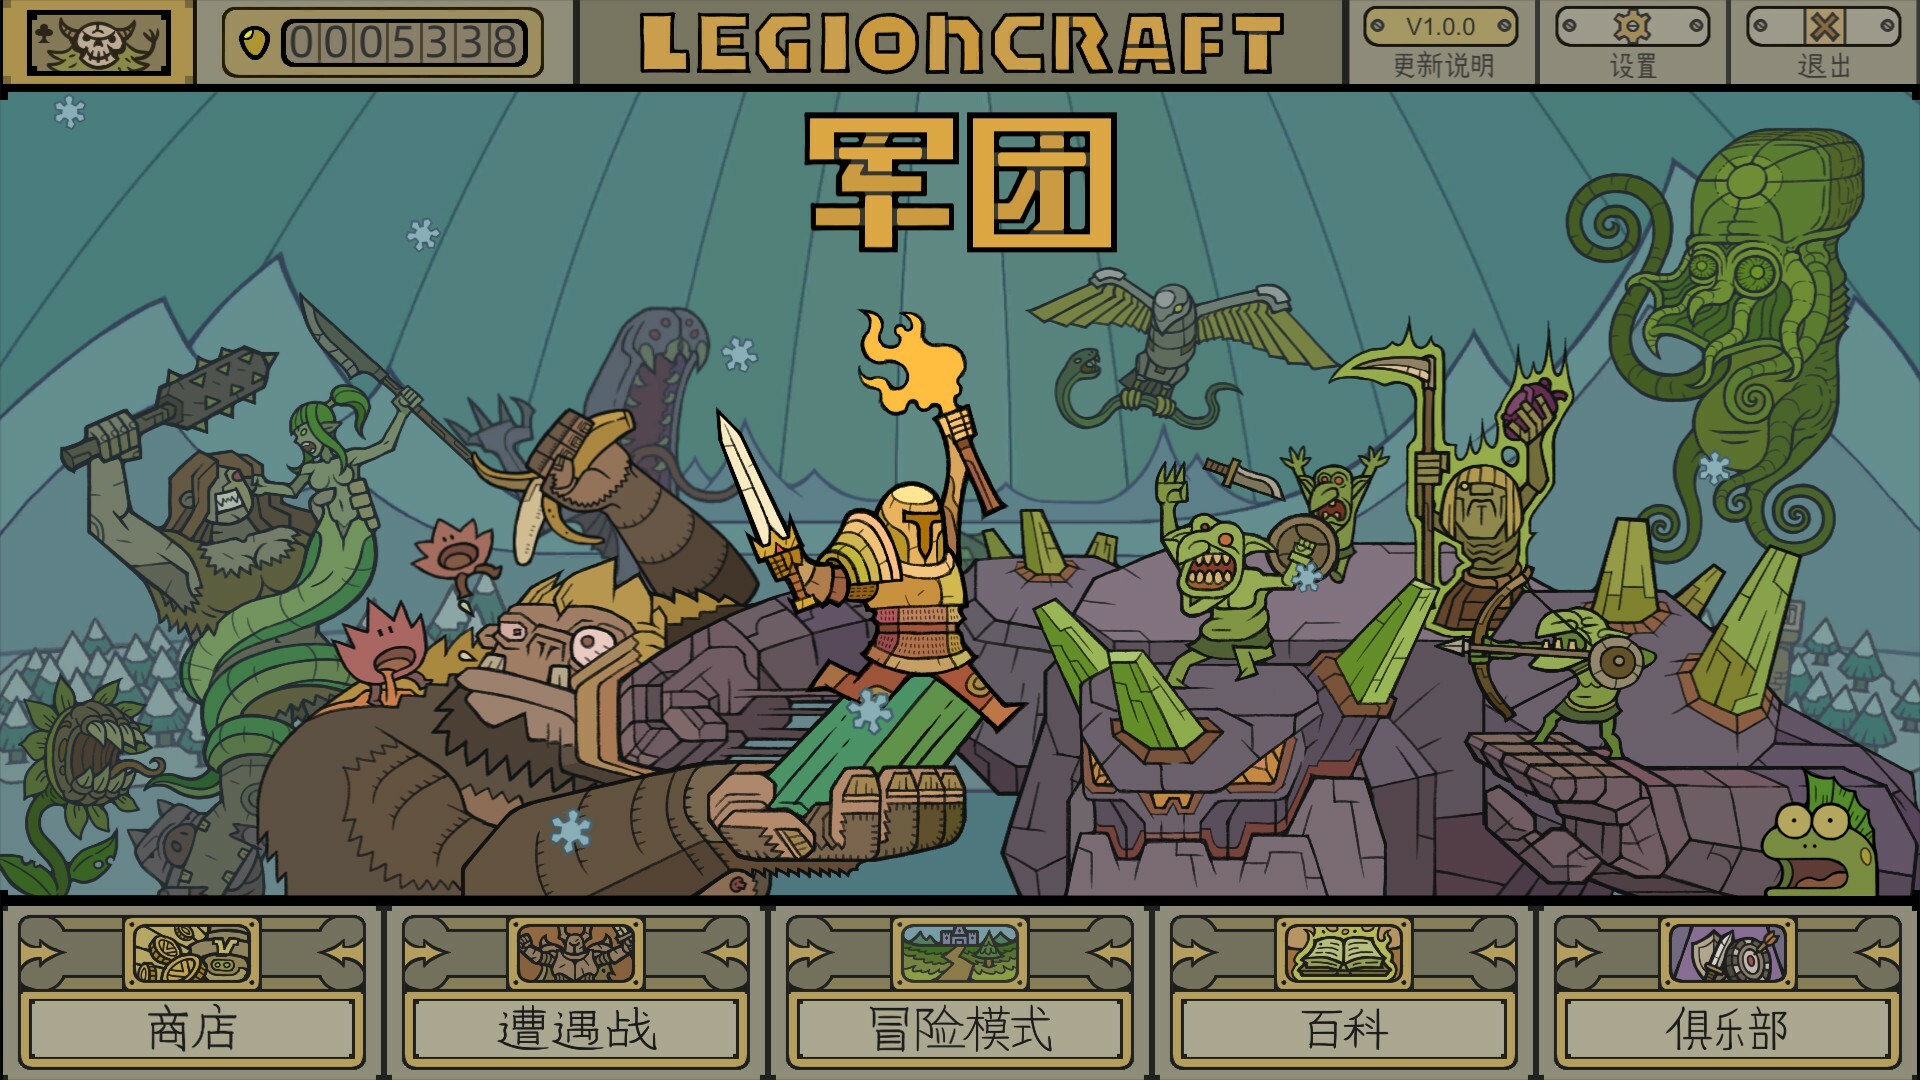 Find the best laptops for LEGIONCRAFT